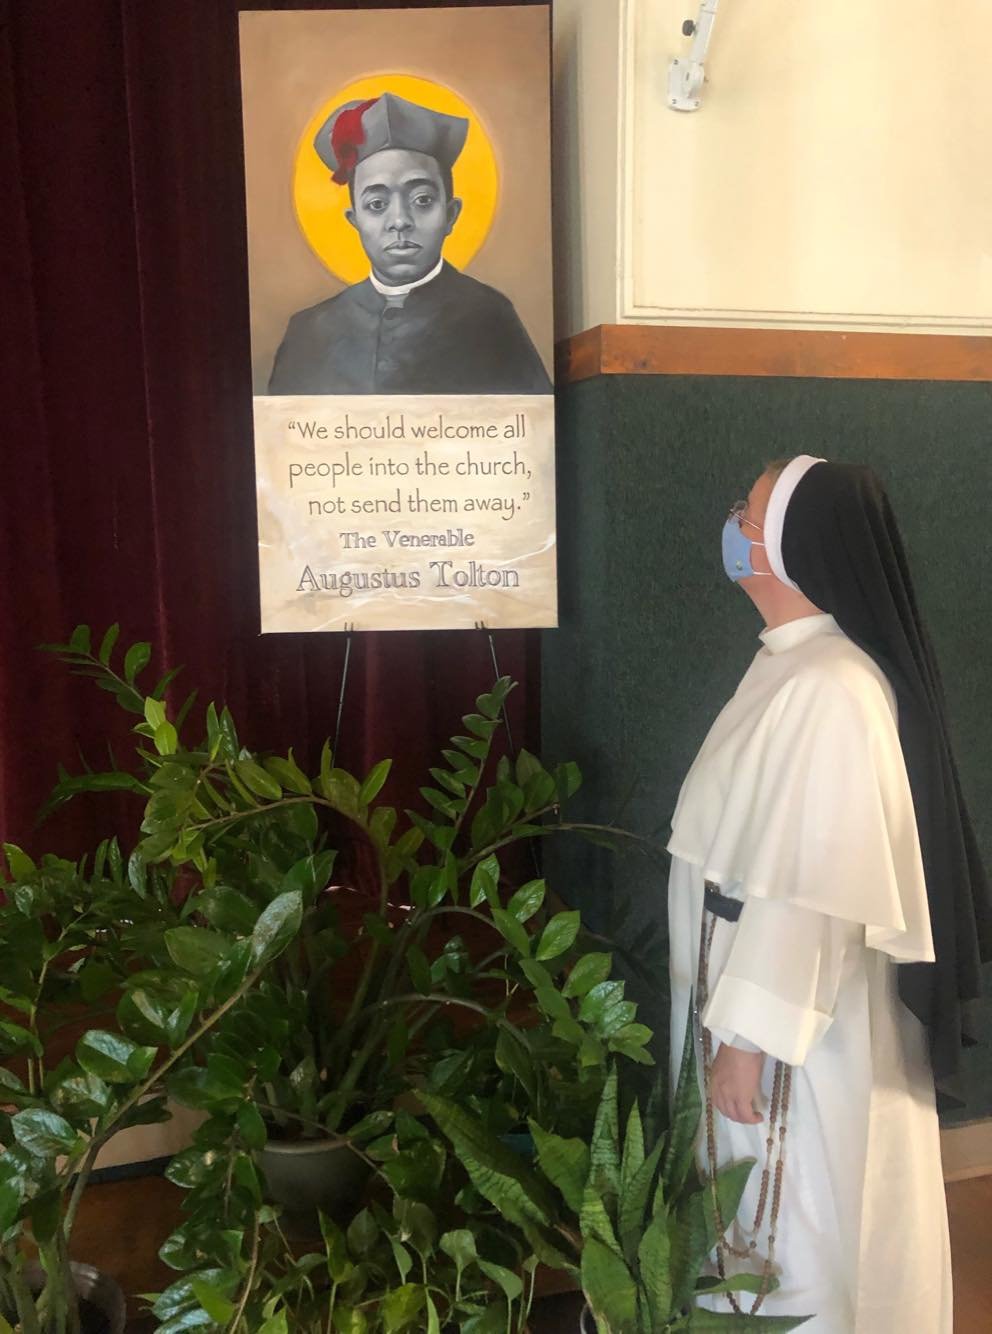 Fourth-grade teacher Dominican Sister Mary Olivia Shirley admires the image in the auditorium of St. Anthony of Padua School in Washington, D.C., on the first day of this academic year.